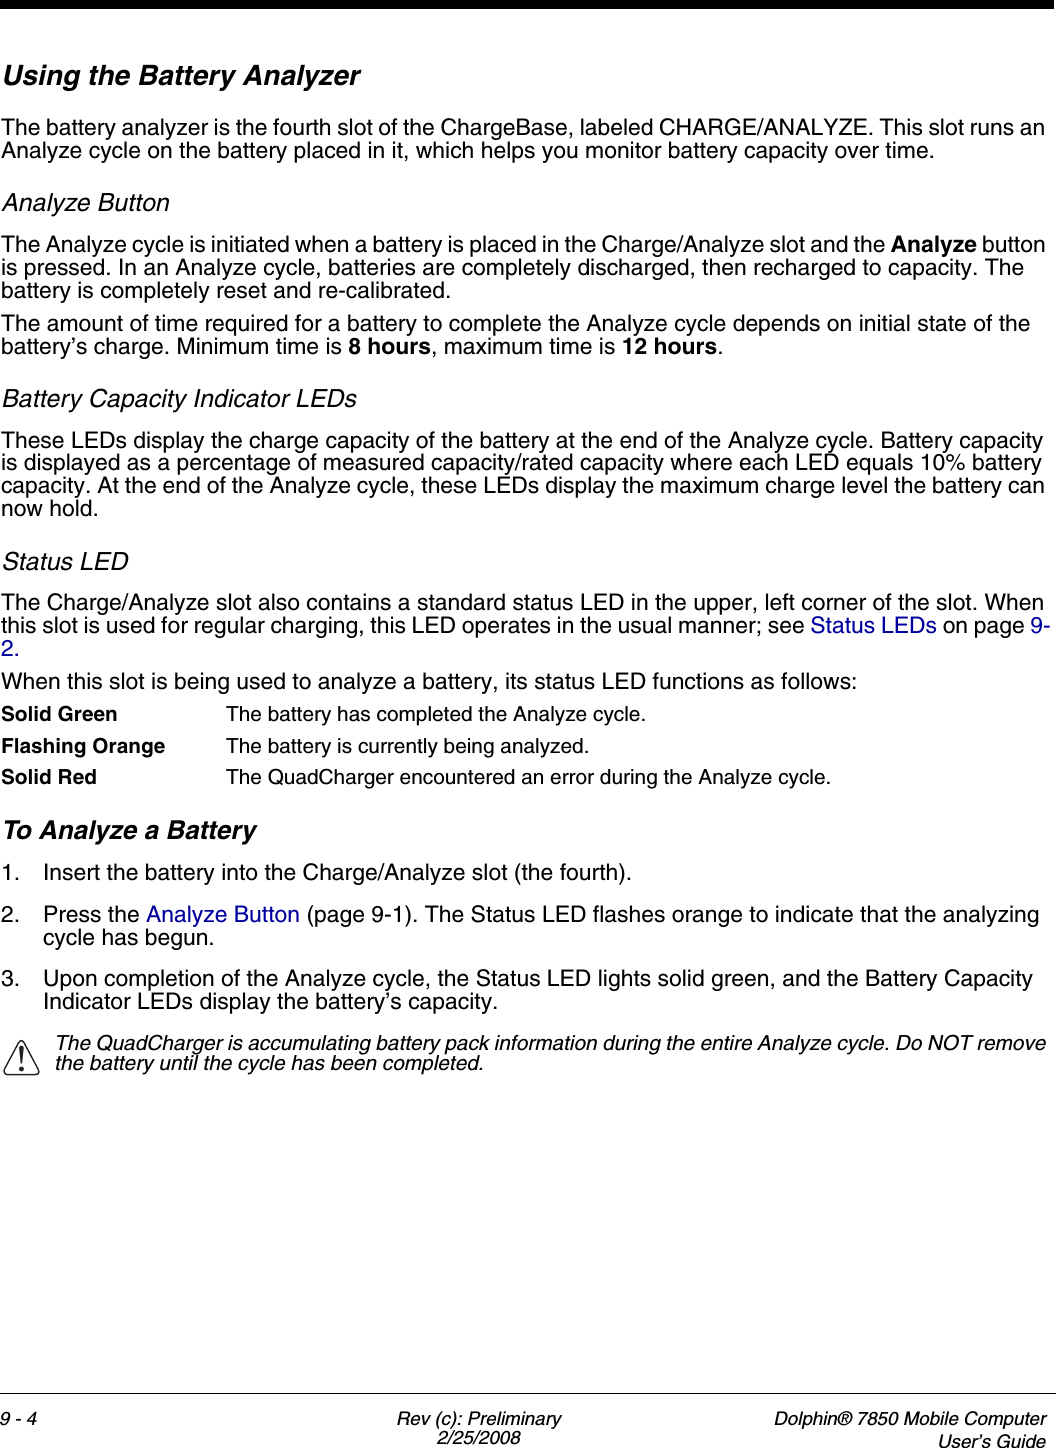 9 - 4 Rev (c): Preliminary2/25/2008Dolphin® 7850 Mobile ComputerUser’s GuideUsing the Battery Analyzer The battery analyzer is the fourth slot of the ChargeBase, labeled CHARGE/ANALYZE. This slot runs an Analyze cycle on the battery placed in it, which helps you monitor battery capacity over time. Analyze ButtonThe Analyze cycle is initiated when a battery is placed in the Charge/Analyze slot and the Analyze button is pressed. In an Analyze cycle, batteries are completely discharged, then recharged to capacity. The battery is completely reset and re-calibrated. The amount of time required for a battery to complete the Analyze cycle depends on initial state of the battery’s charge. Minimum time is 8 hours, maximum time is 12 hours.Battery Capacity Indicator LEDsThese LEDs display the charge capacity of the battery at the end of the Analyze cycle. Battery capacity is displayed as a percentage of measured capacity/rated capacity where each LED equals 10% battery capacity. At the end of the Analyze cycle, these LEDs display the maximum charge level the battery can now hold.Status LEDThe Charge/Analyze slot also contains a standard status LED in the upper, left corner of the slot. When this slot is used for regular charging, this LED operates in the usual manner; see Status LEDs on page 9-2.When this slot is being used to analyze a battery, its status LED functions as follows:Solid Green The battery has completed the Analyze cycle. Flashing Orange The battery is currently being analyzed. Solid Red The QuadCharger encountered an error during the Analyze cycle.To Analyze a Battery1. Insert the battery into the Charge/Analyze slot (the fourth).2. Press the Analyze Button (page 9-1). The Status LED flashes orange to indicate that the analyzing cycle has begun.3. Upon completion of the Analyze cycle, the Status LED lights solid green, and the Battery Capacity Indicator LEDs display the battery’s capacity.The QuadCharger is accumulating battery pack information during the entire Analyze cycle. Do NOT remove the battery until the cycle has been completed. !